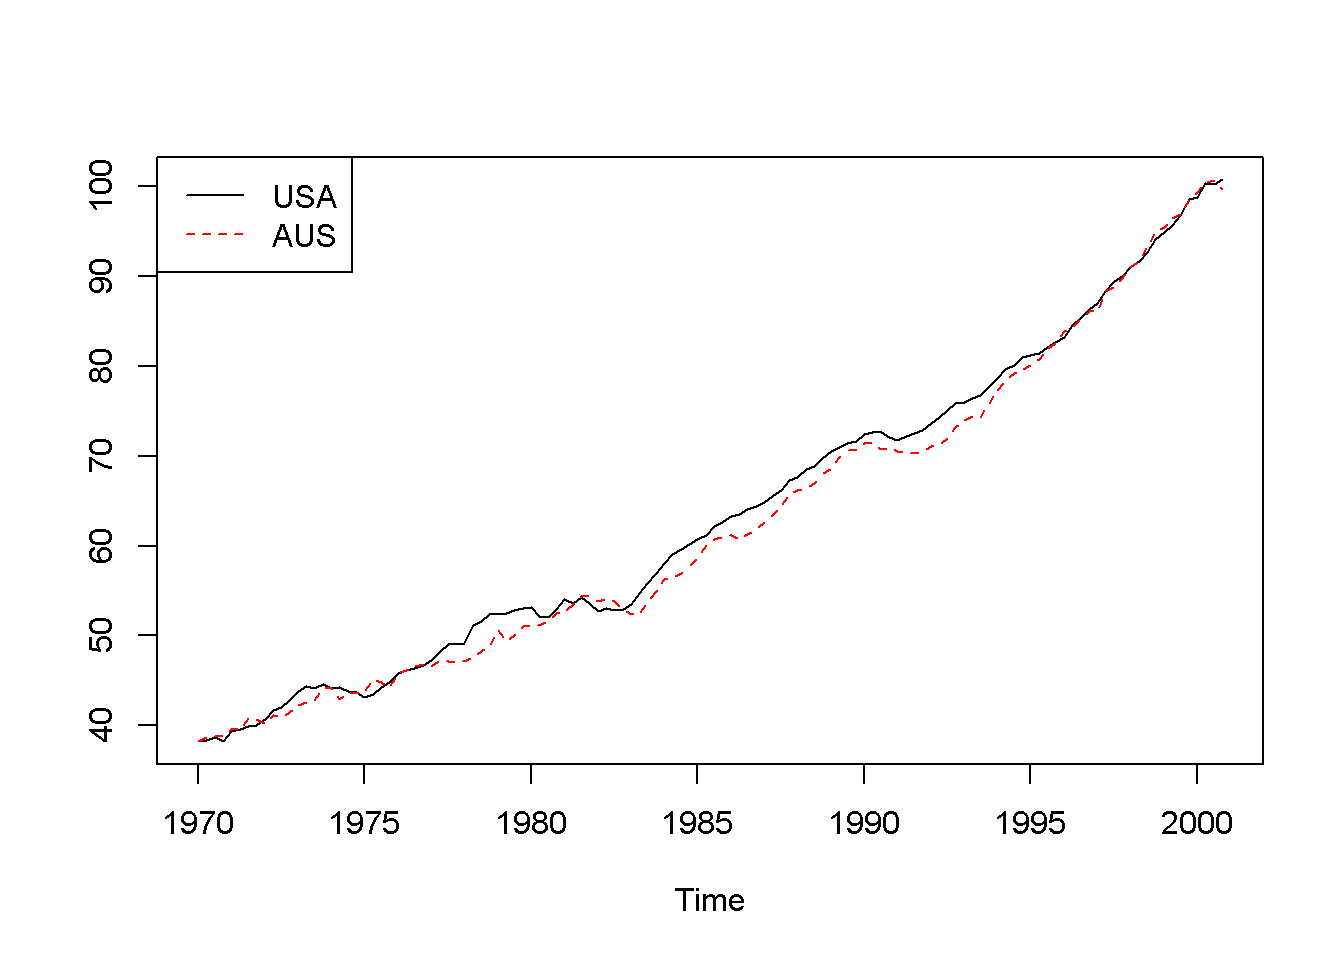 Australian and USA GDP series from dataset 'gdp'